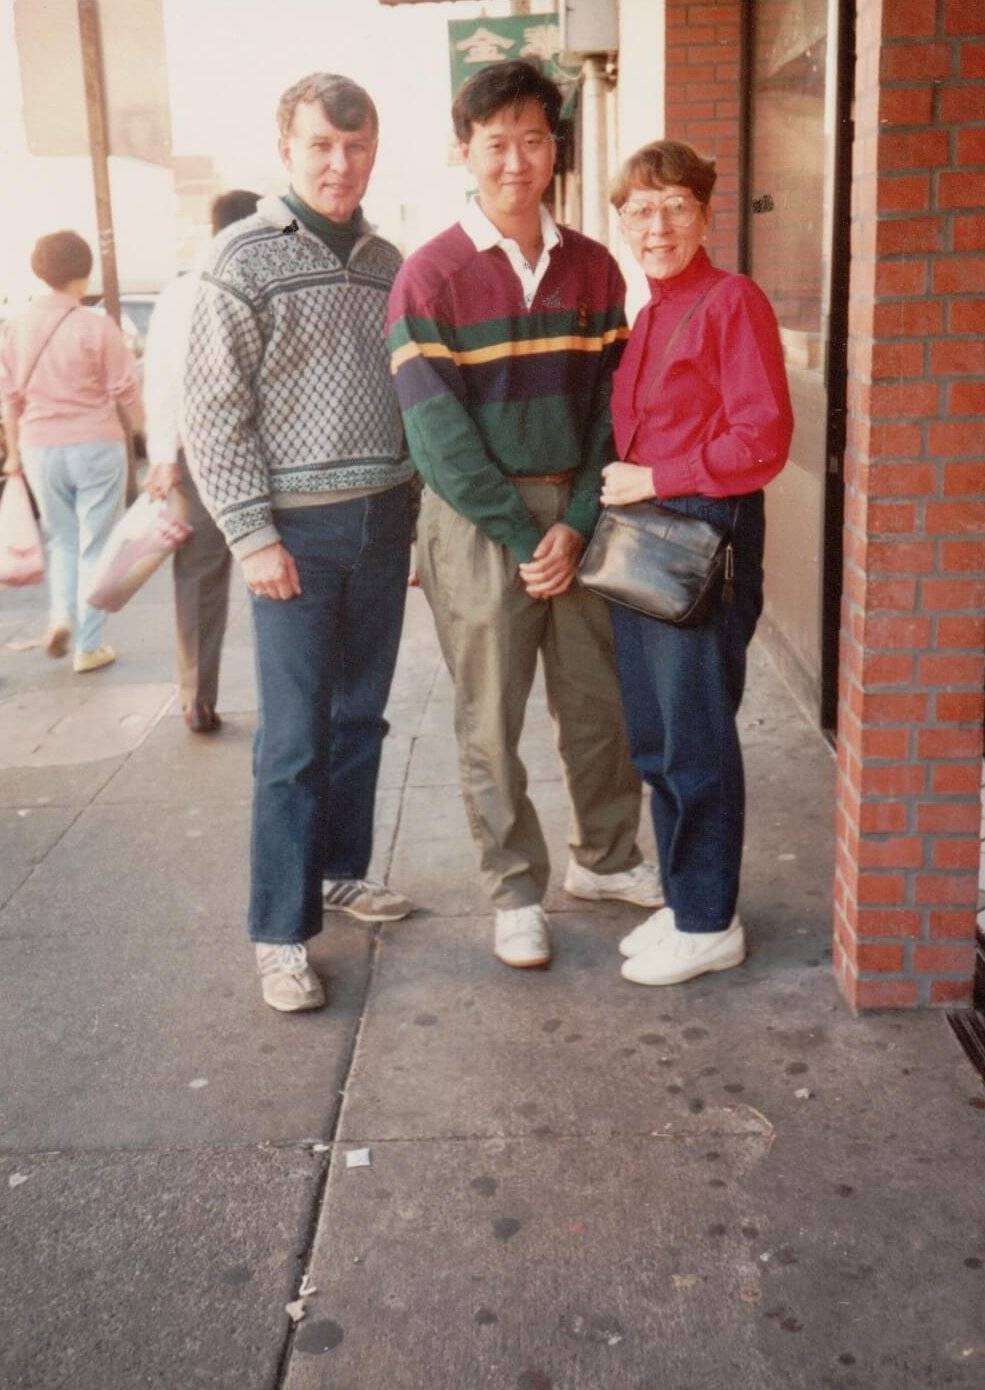 An American couple with a younger Asian man posed between them.